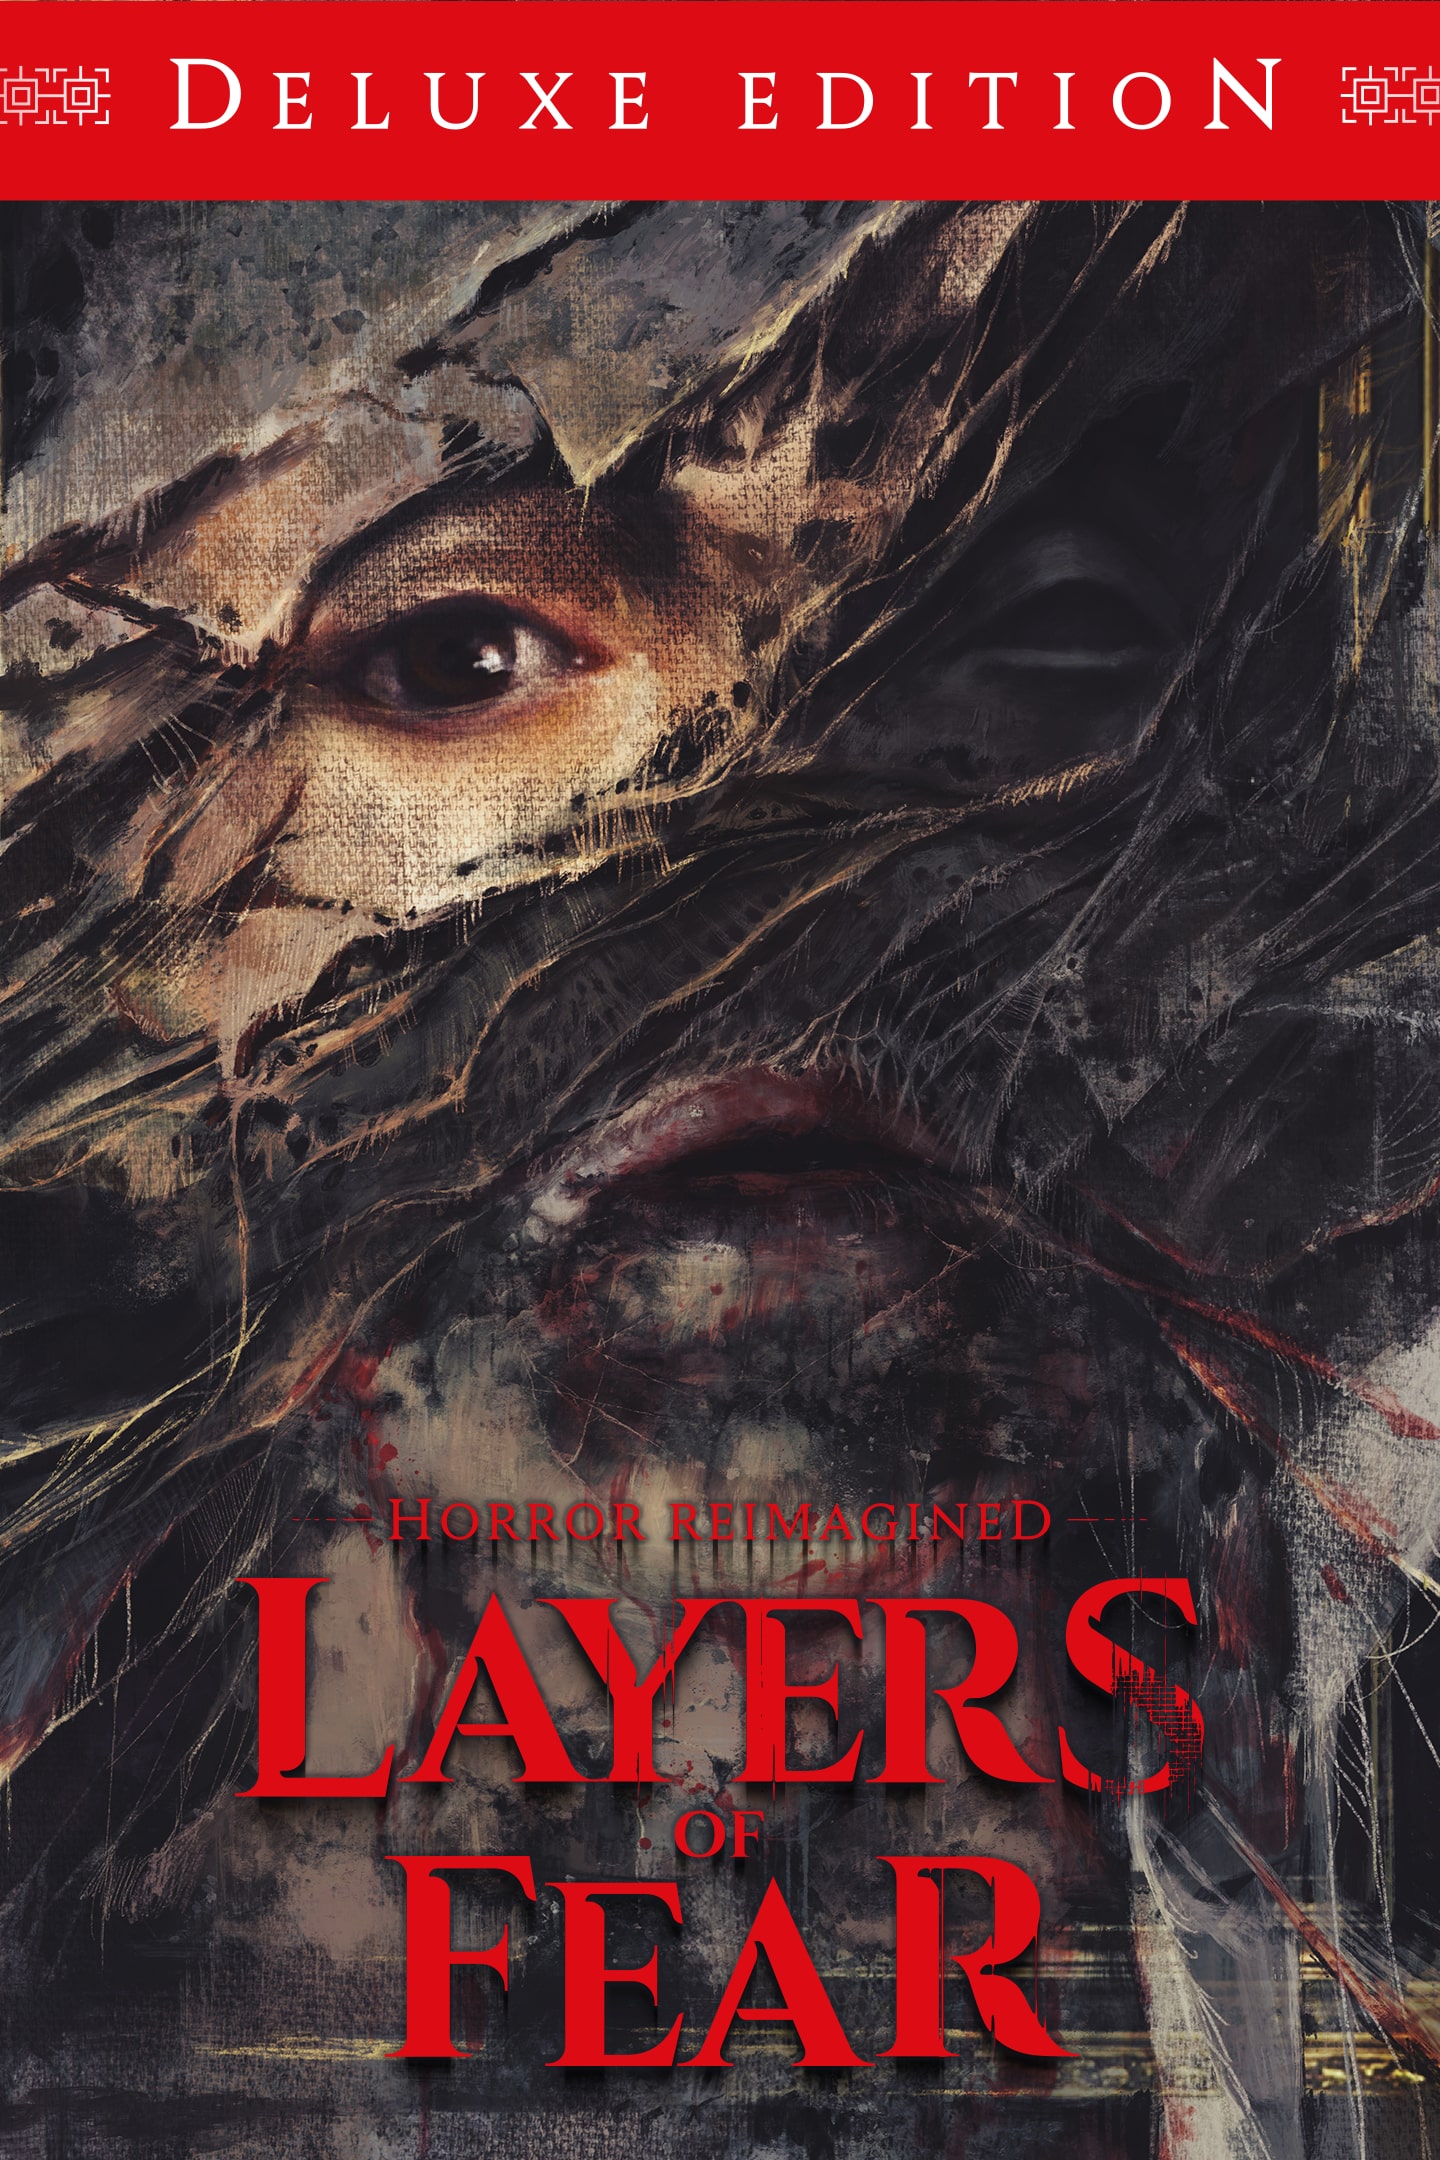 Layers of Fear 2 (PS4) cheap - Price of $17.27